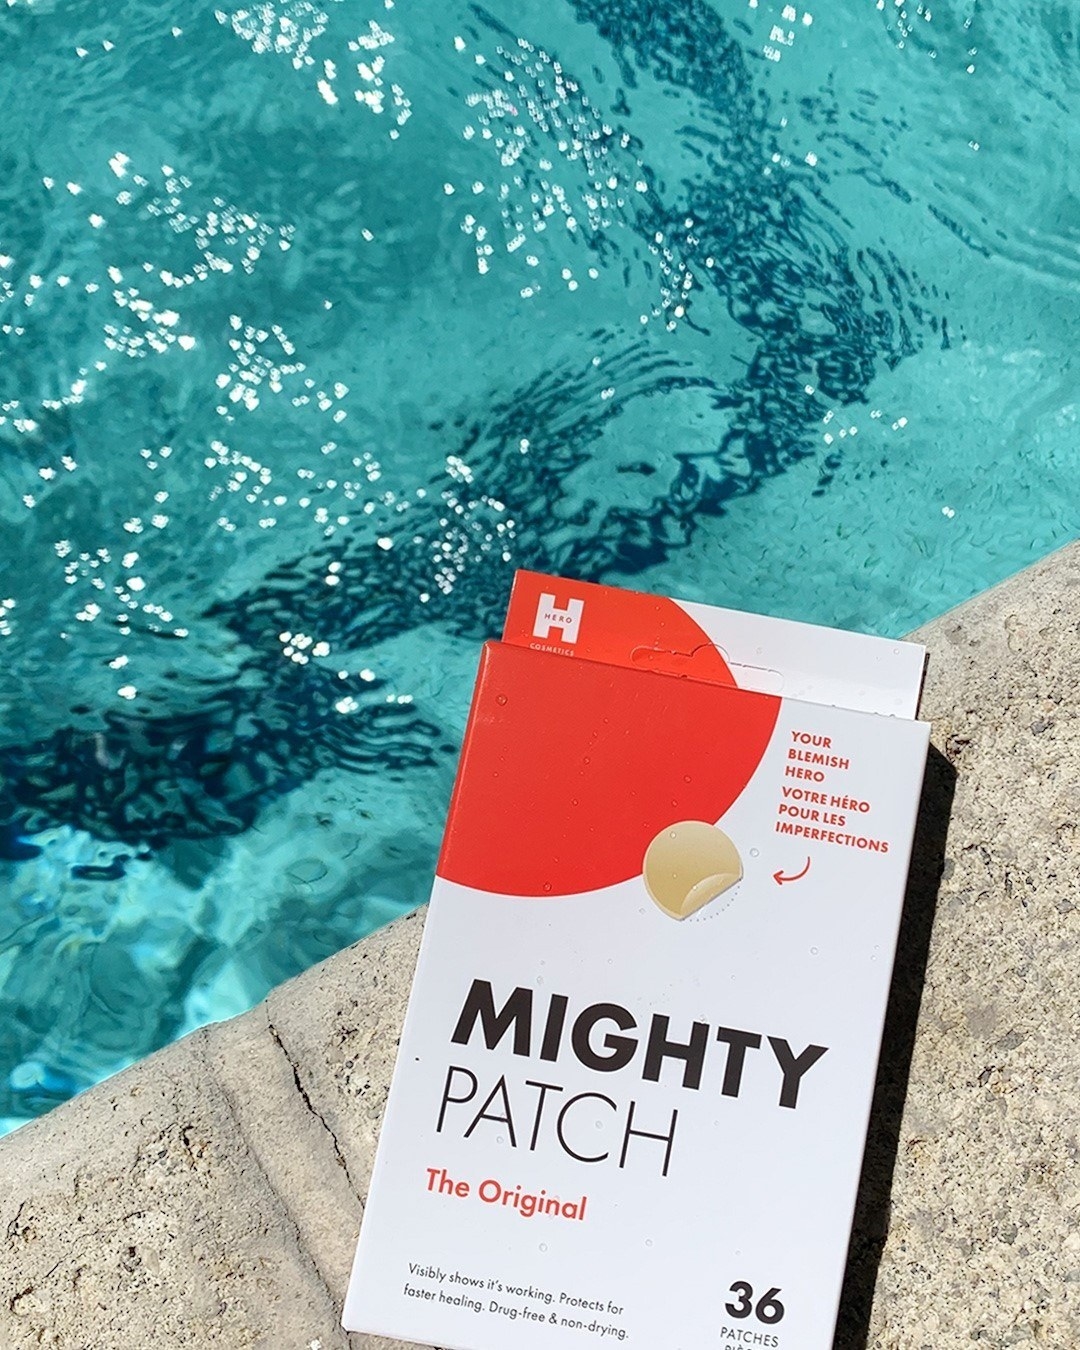 the mighty patch packaging beside a pool